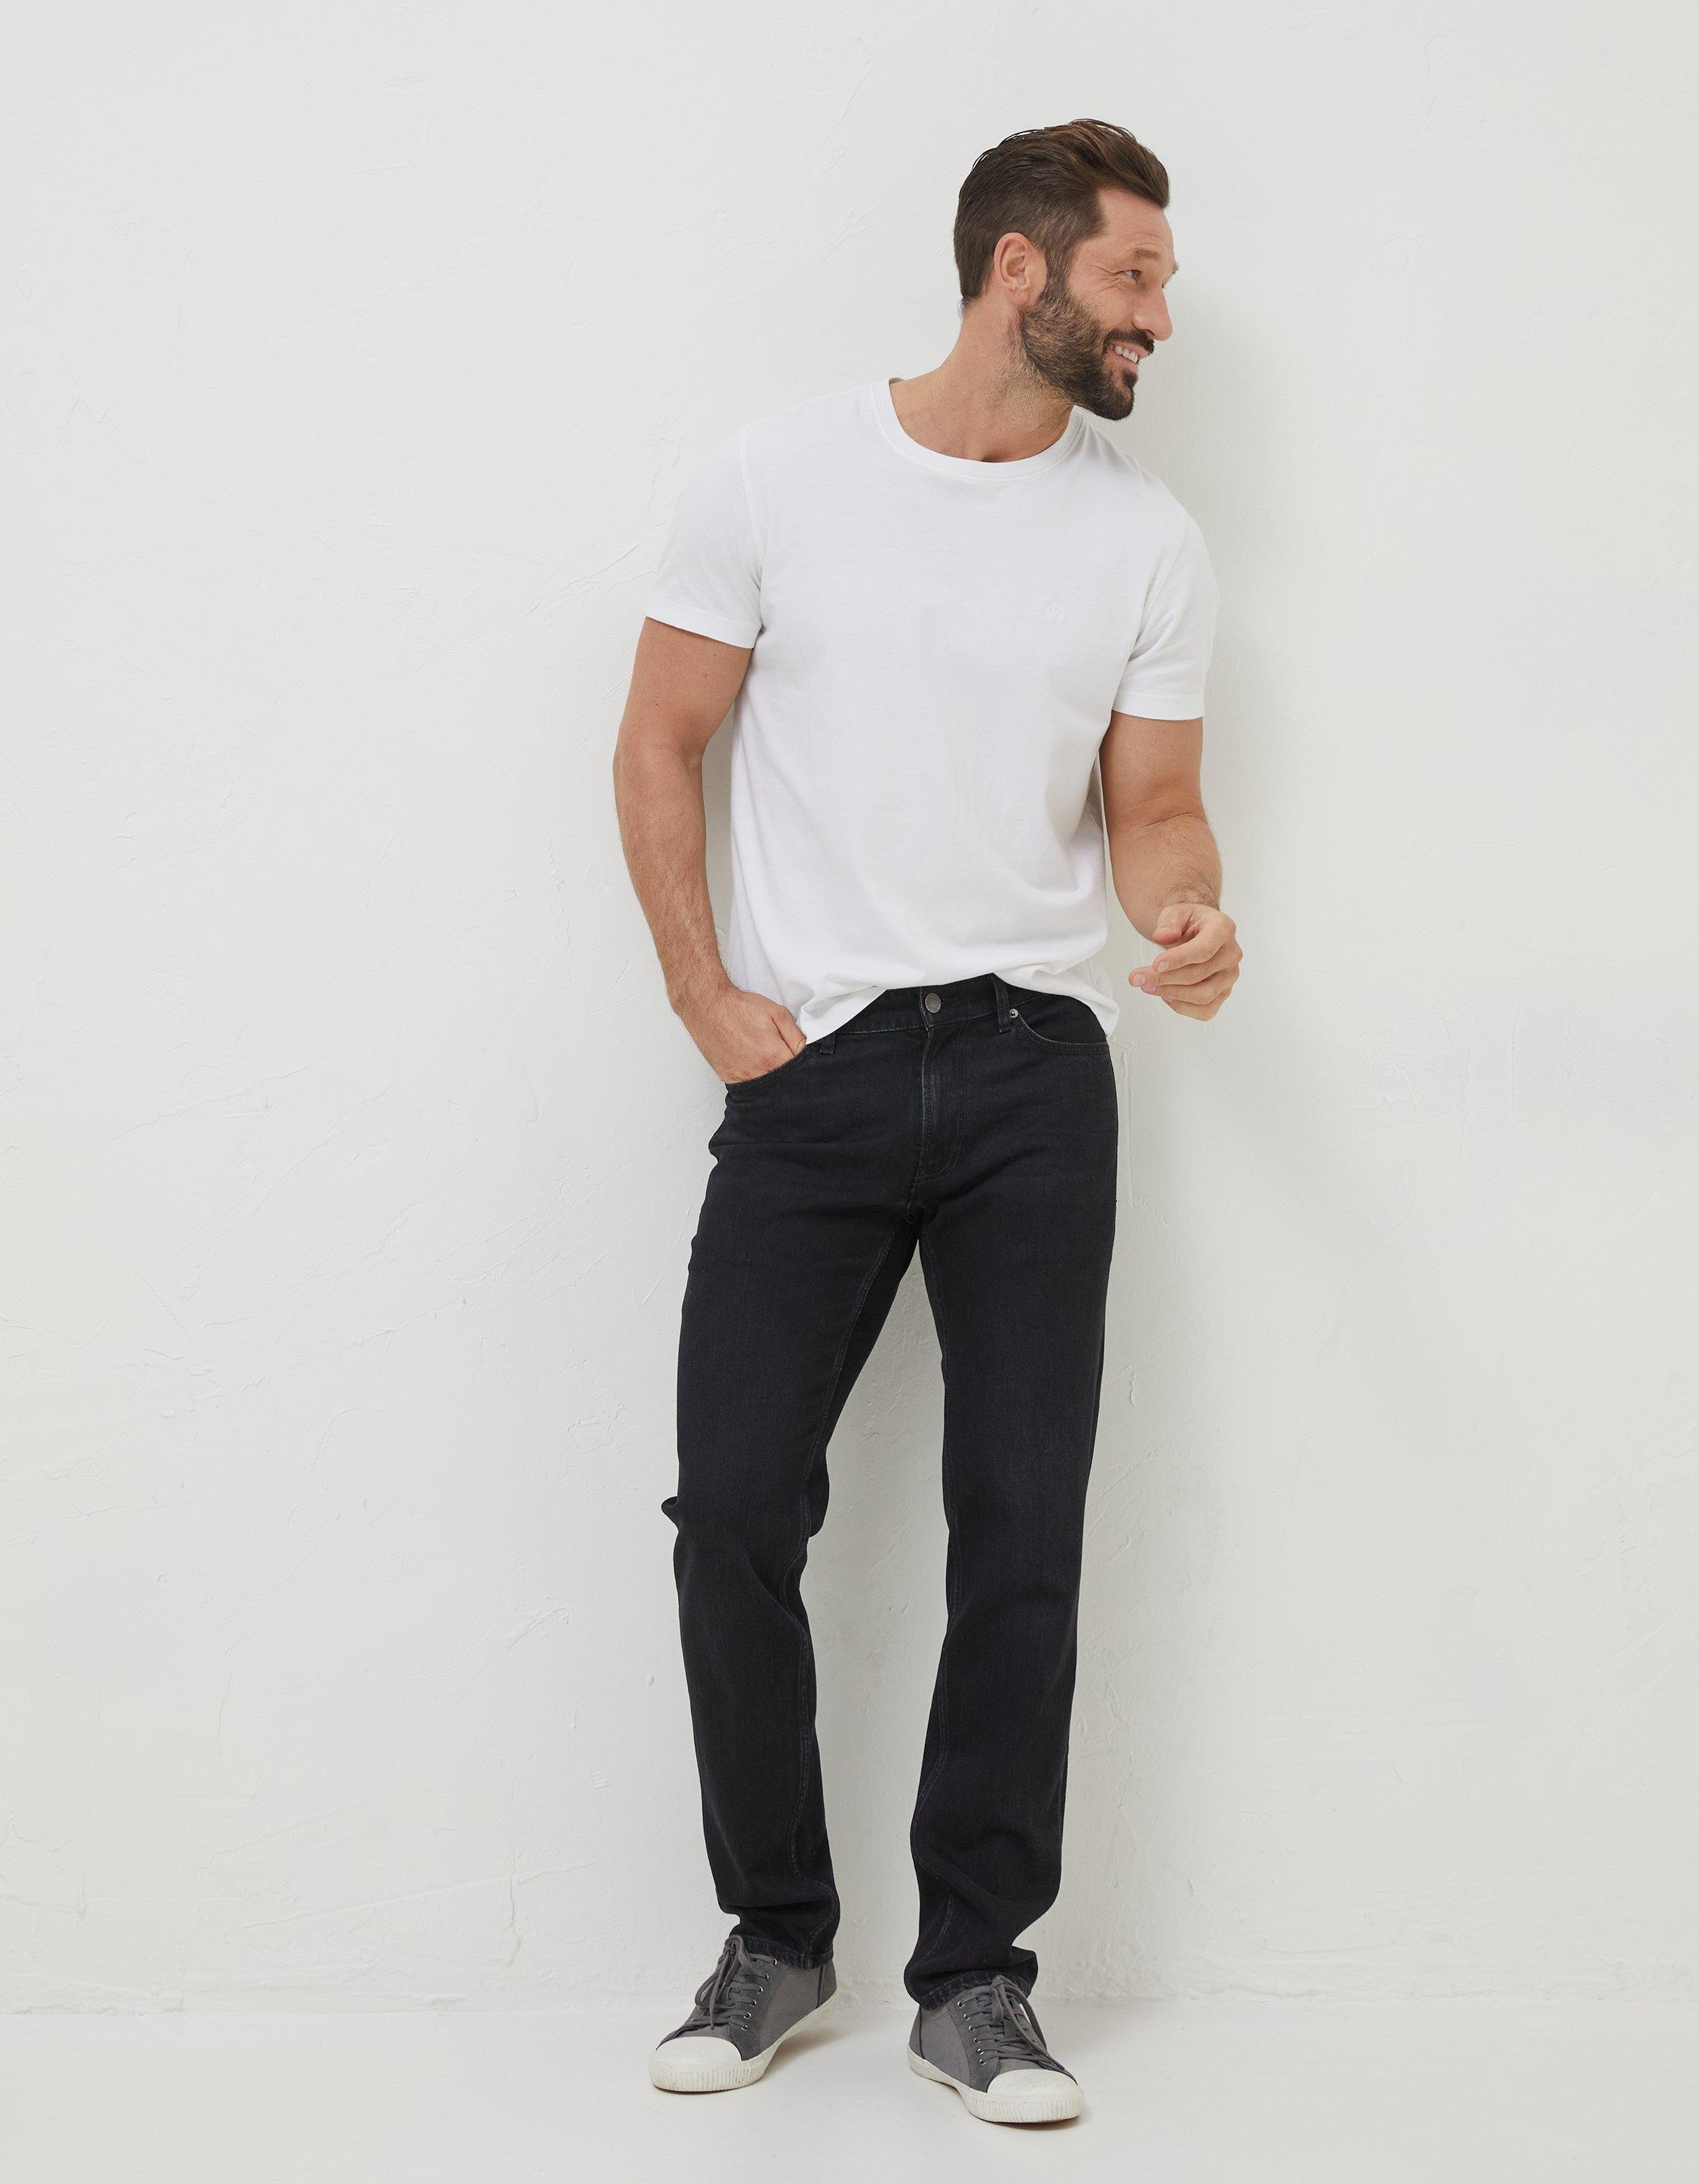 How to Reverse Colour Fading in Black Jeans: 12 Steps